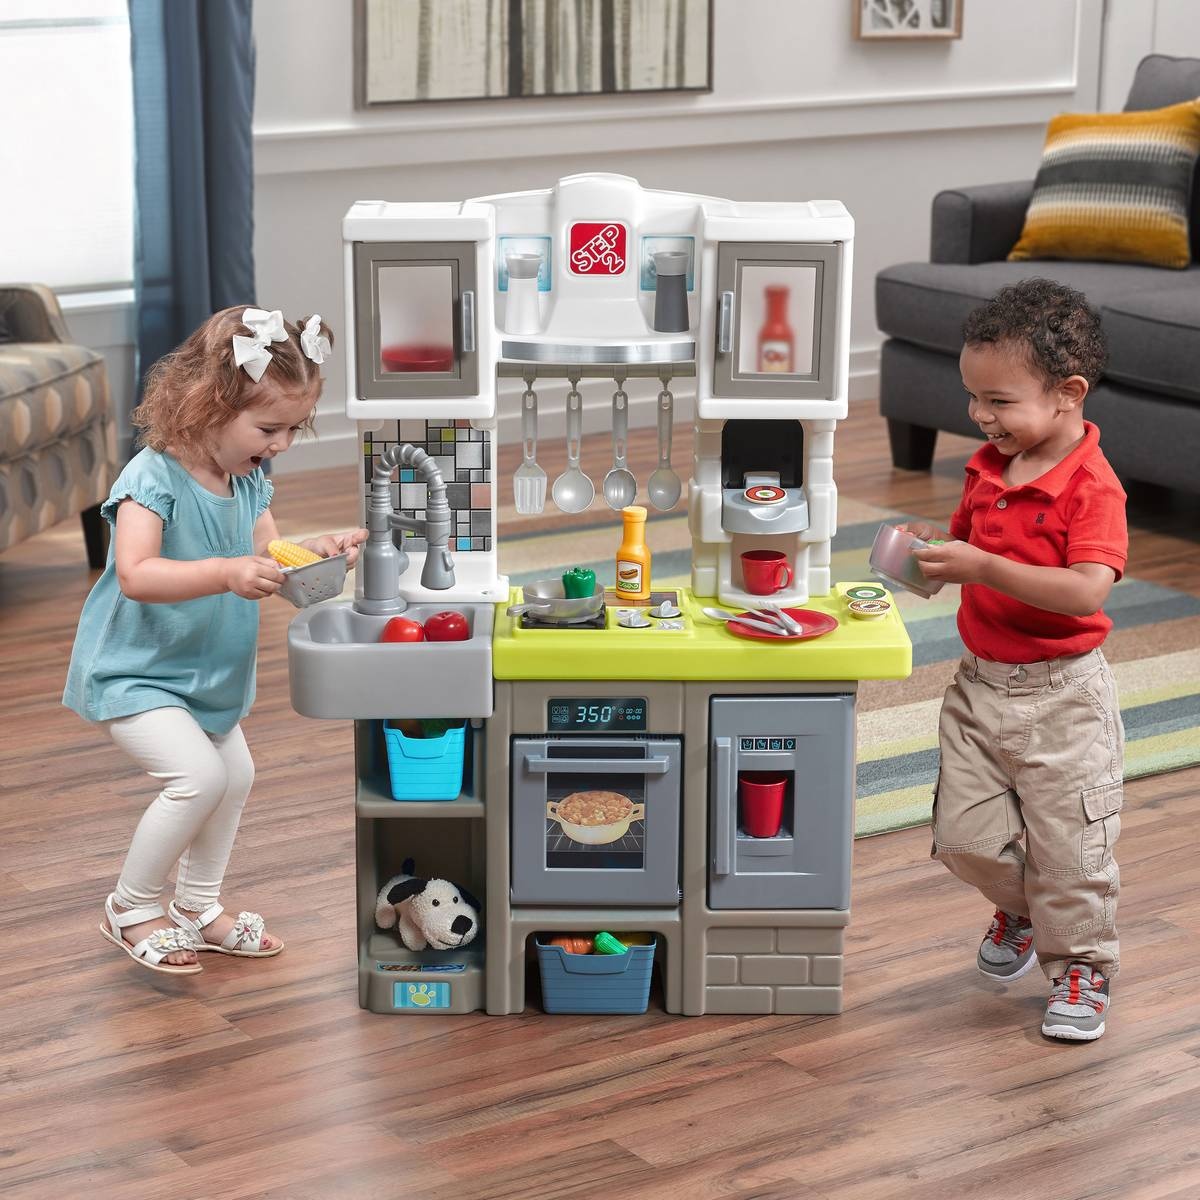 5 Toys To Buy For Your Children This Holiday Season